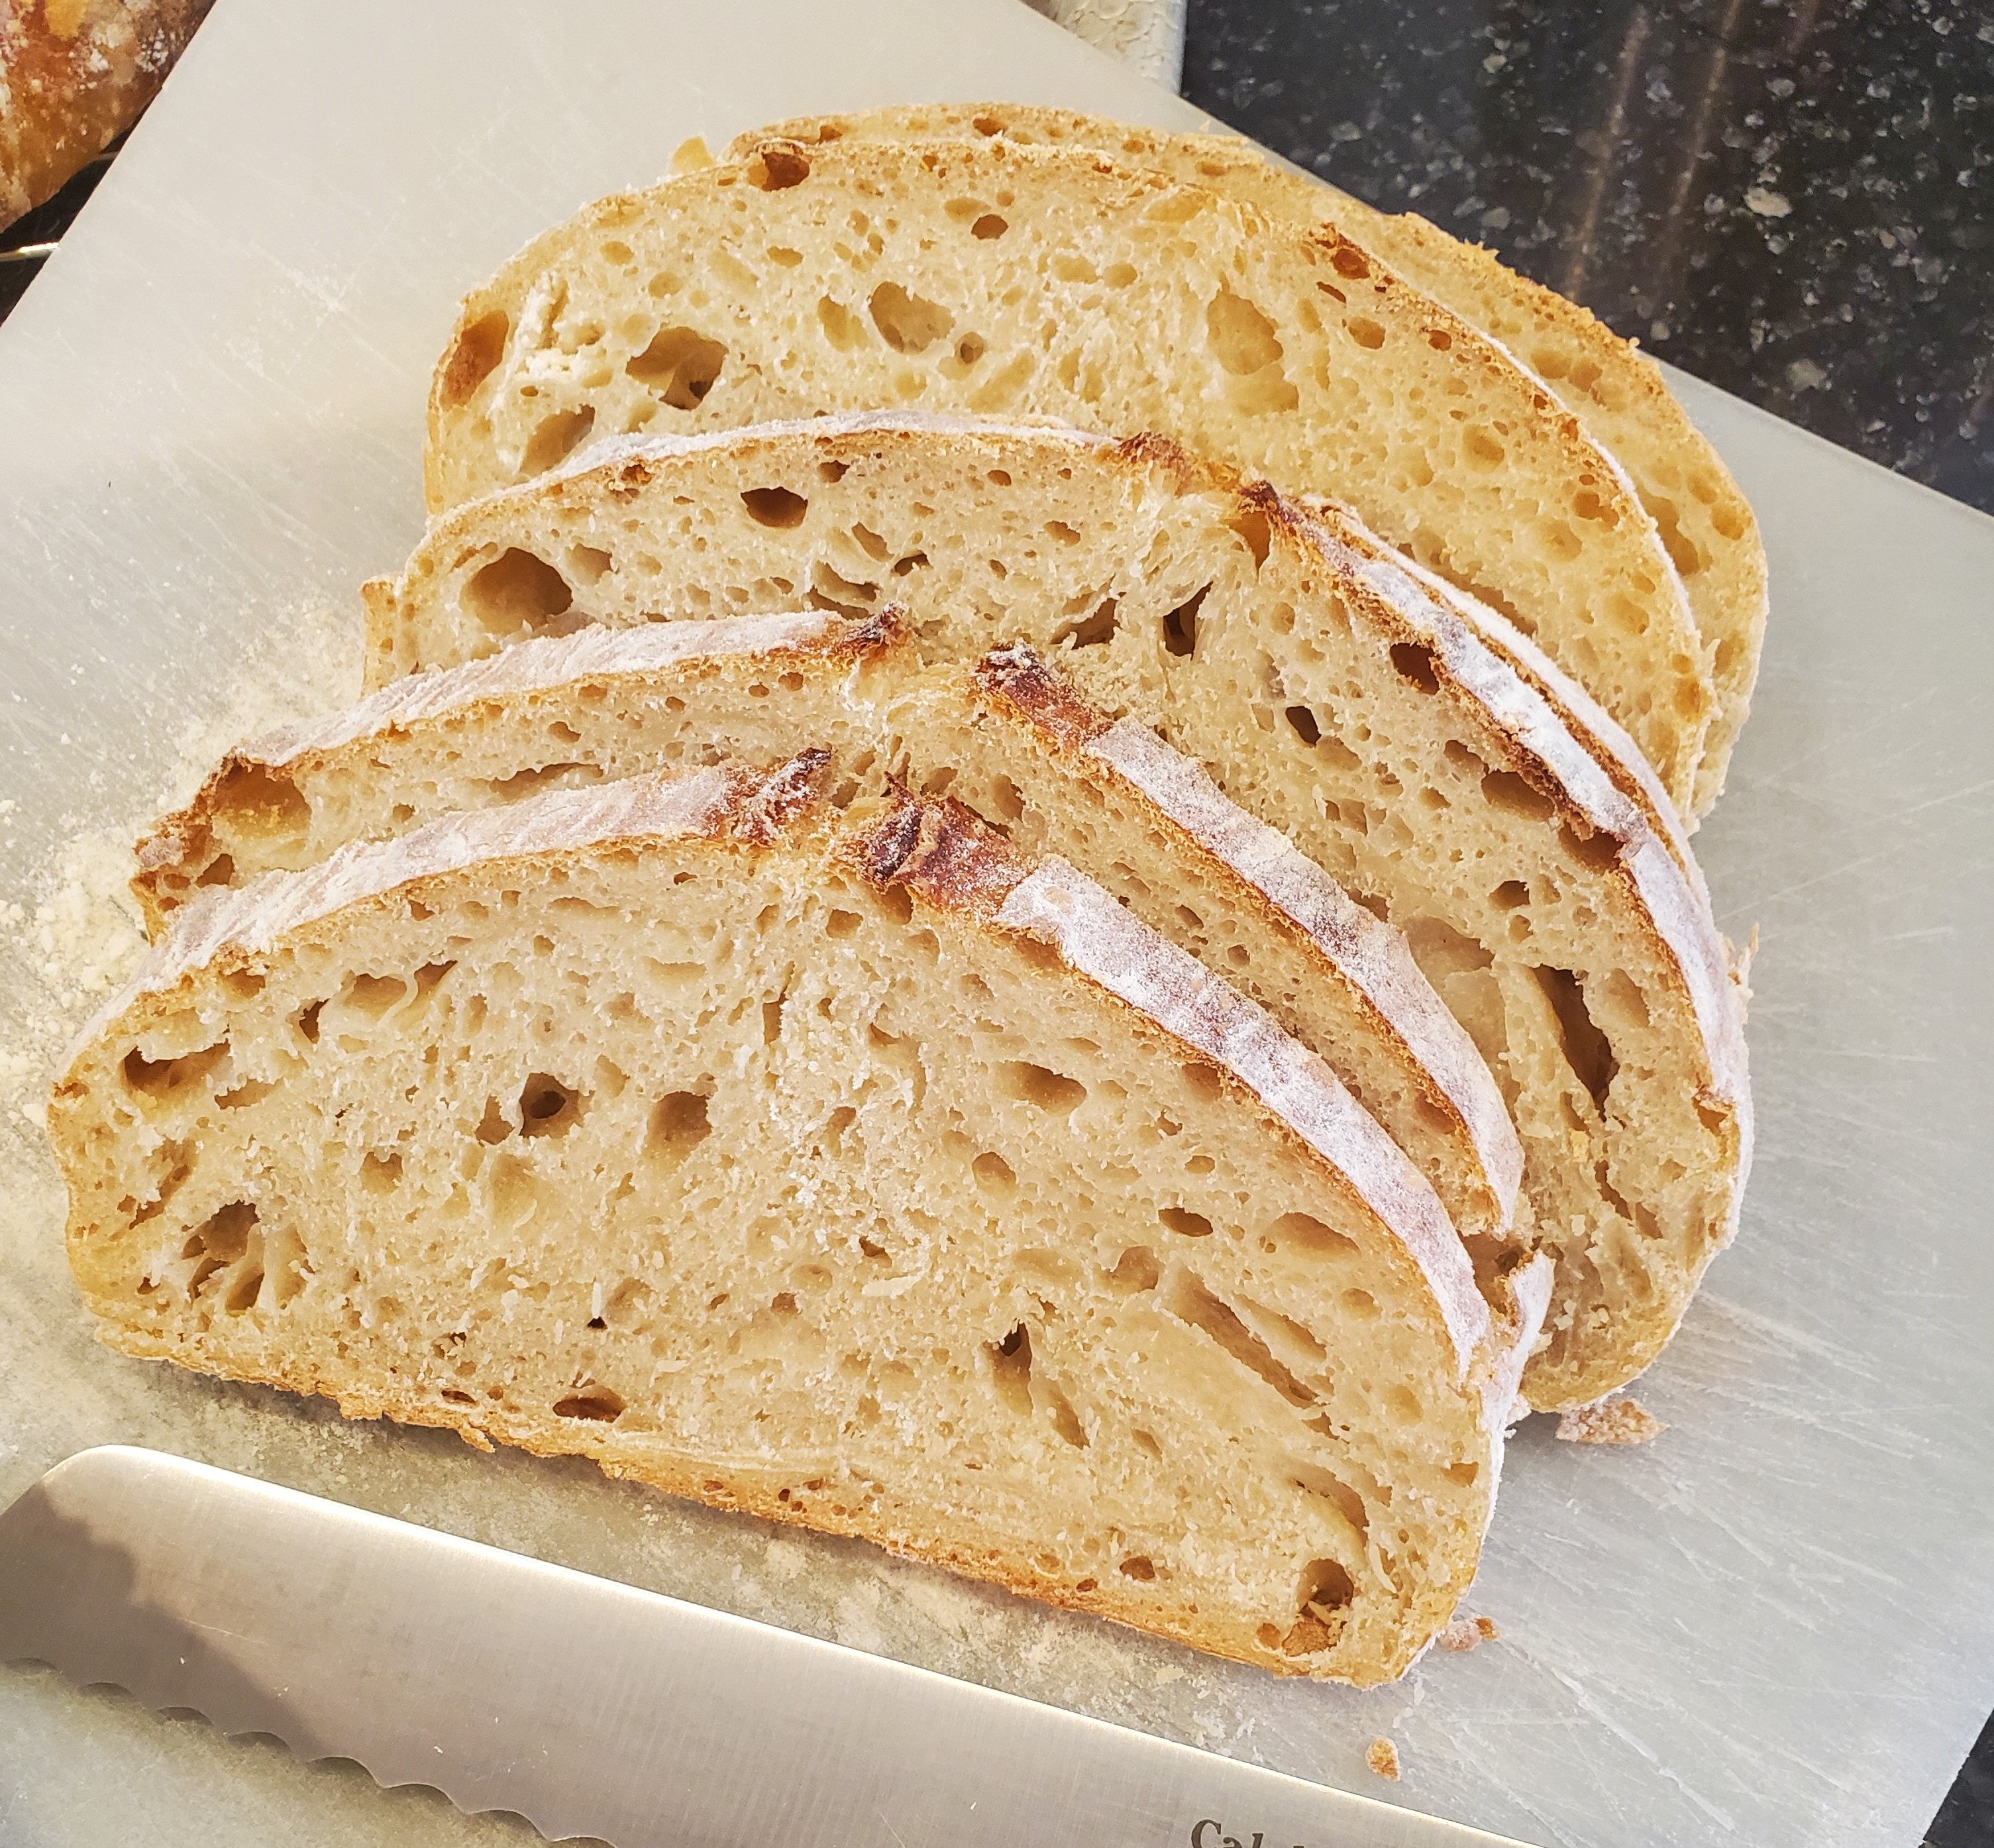 Four slices of airy sourdough displayed on a white plastic cutting board with a serrated knife sitting in front.